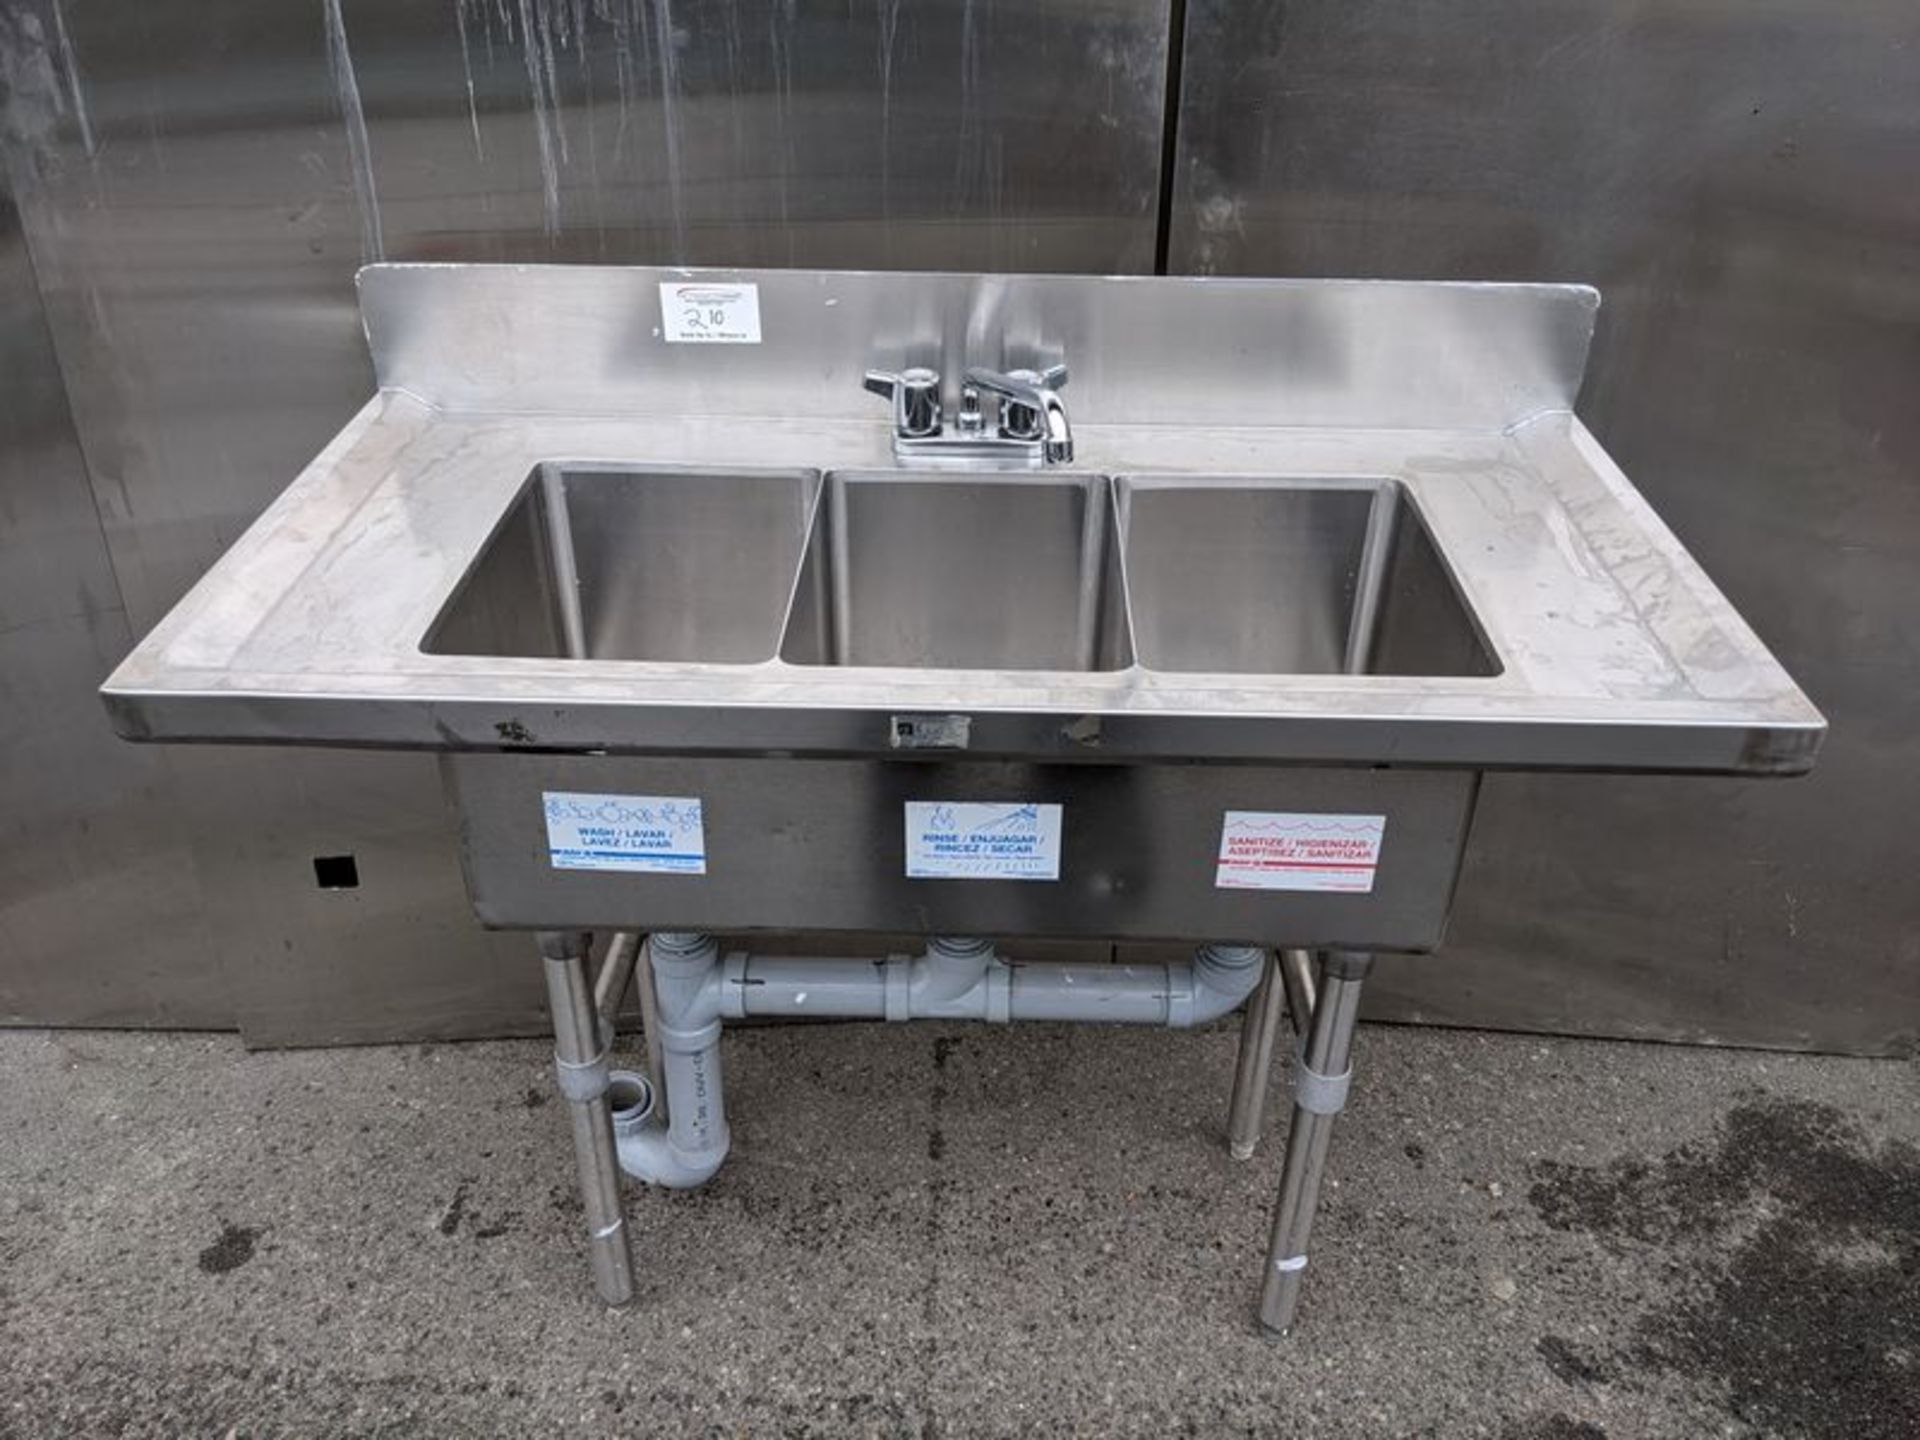 3 Compartment Stainless Steel Sink with Tap